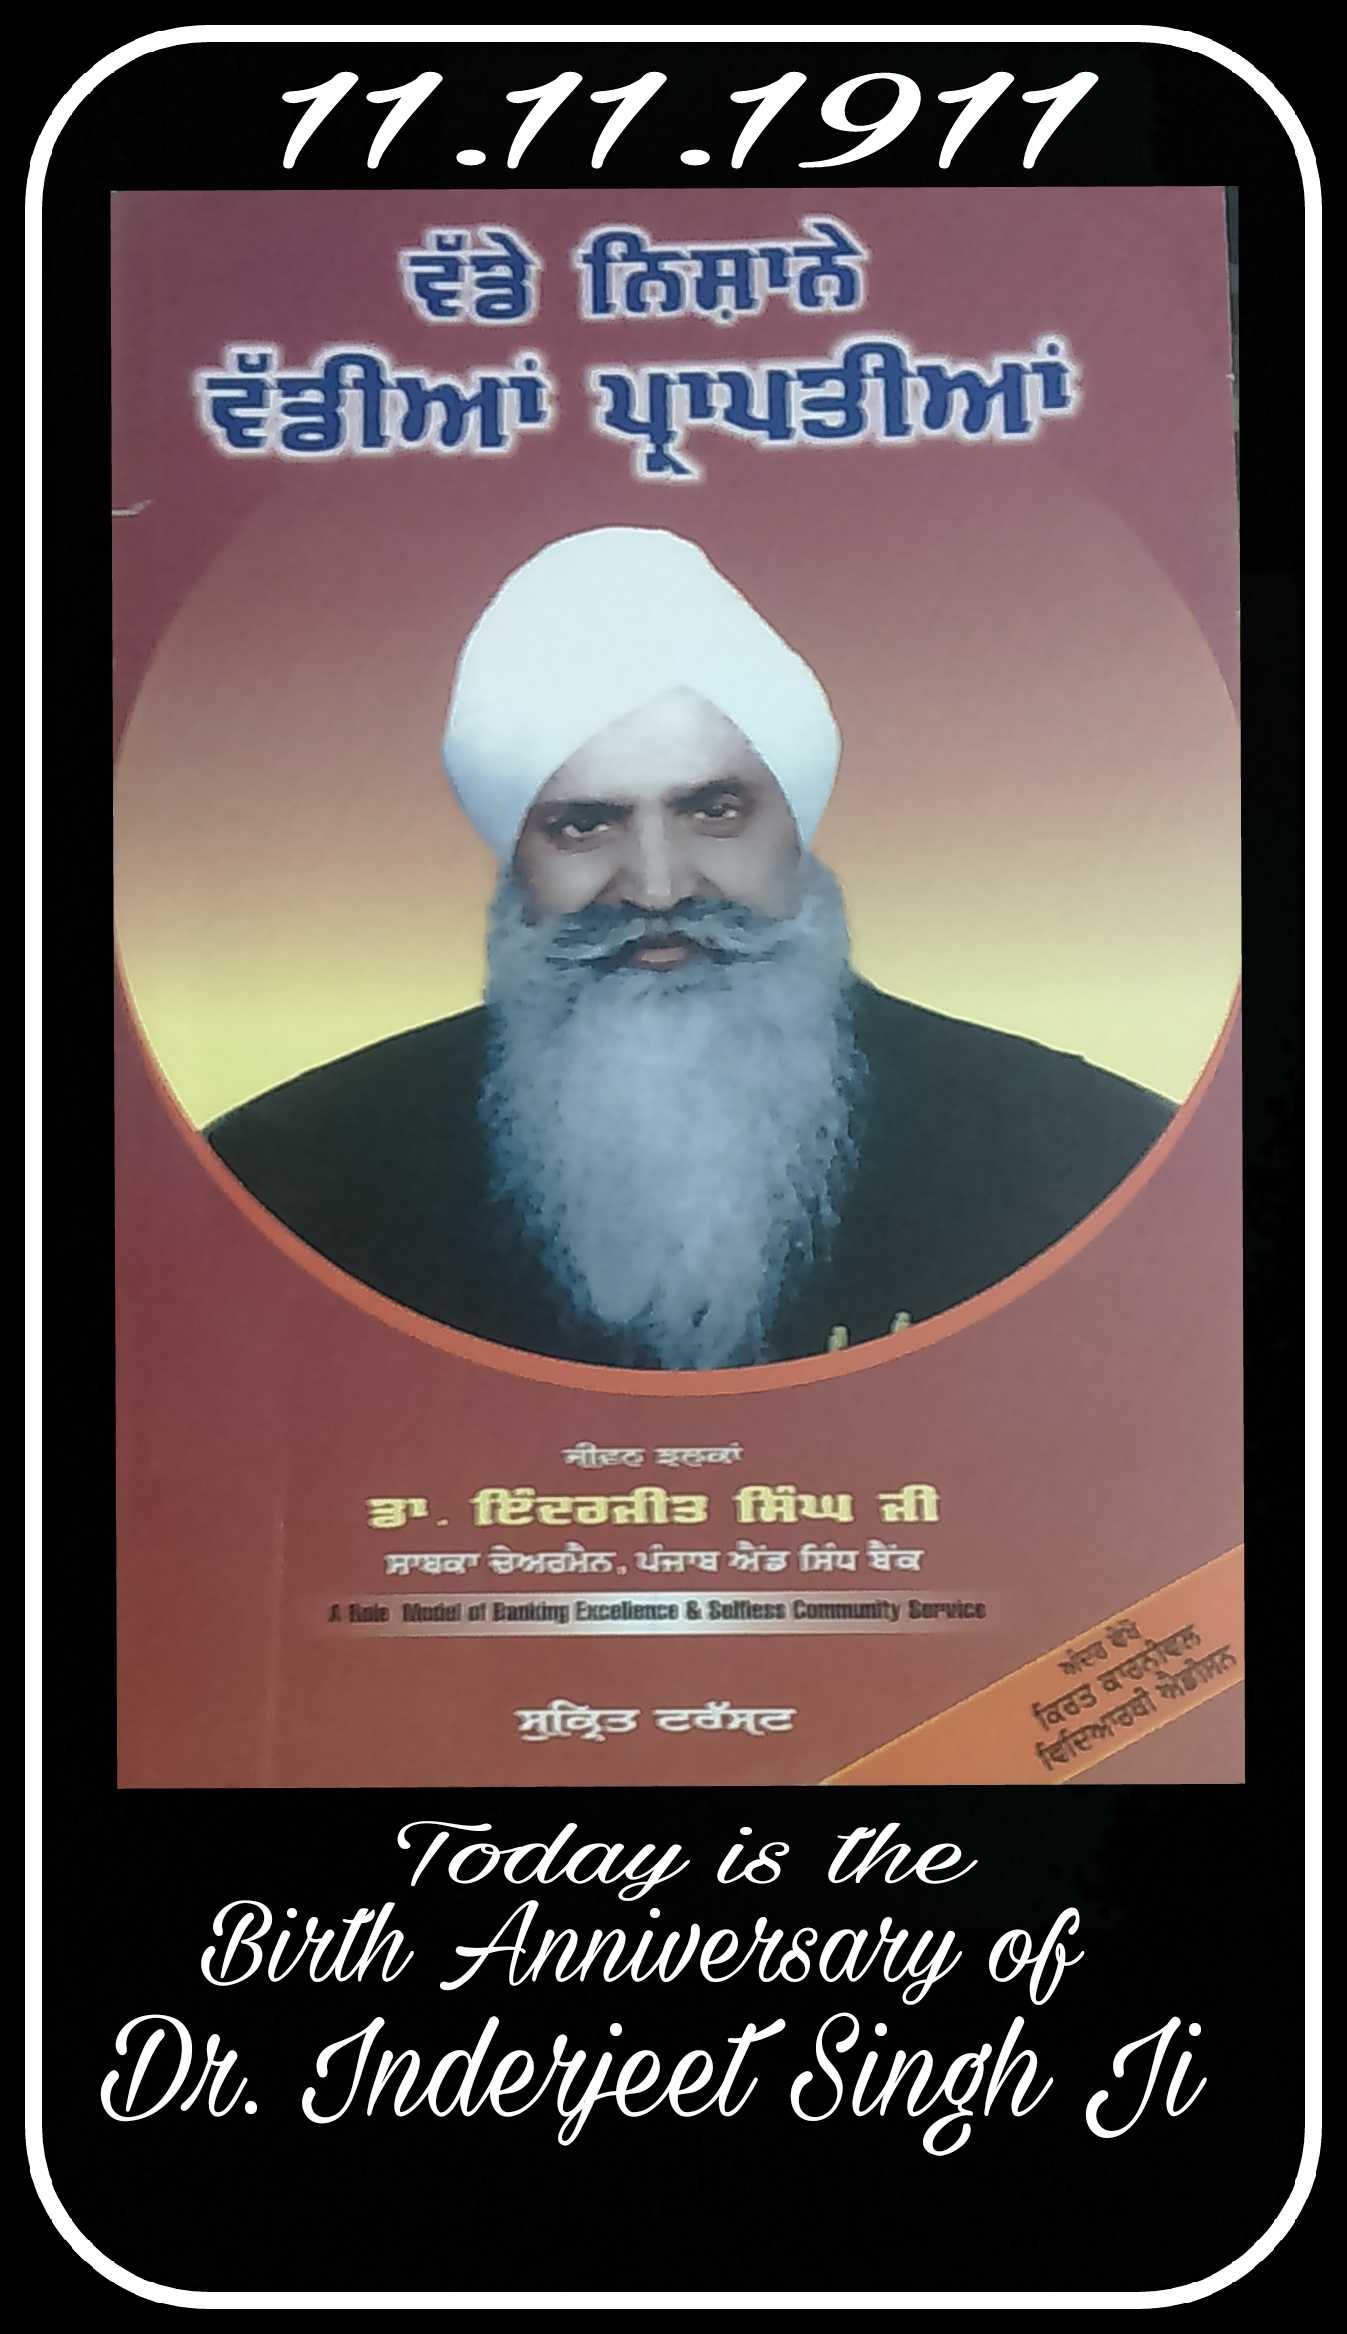 Today is the birth anniversary of Dr. Inderjeet Singh Ji of PSB - A Legendary Banker.